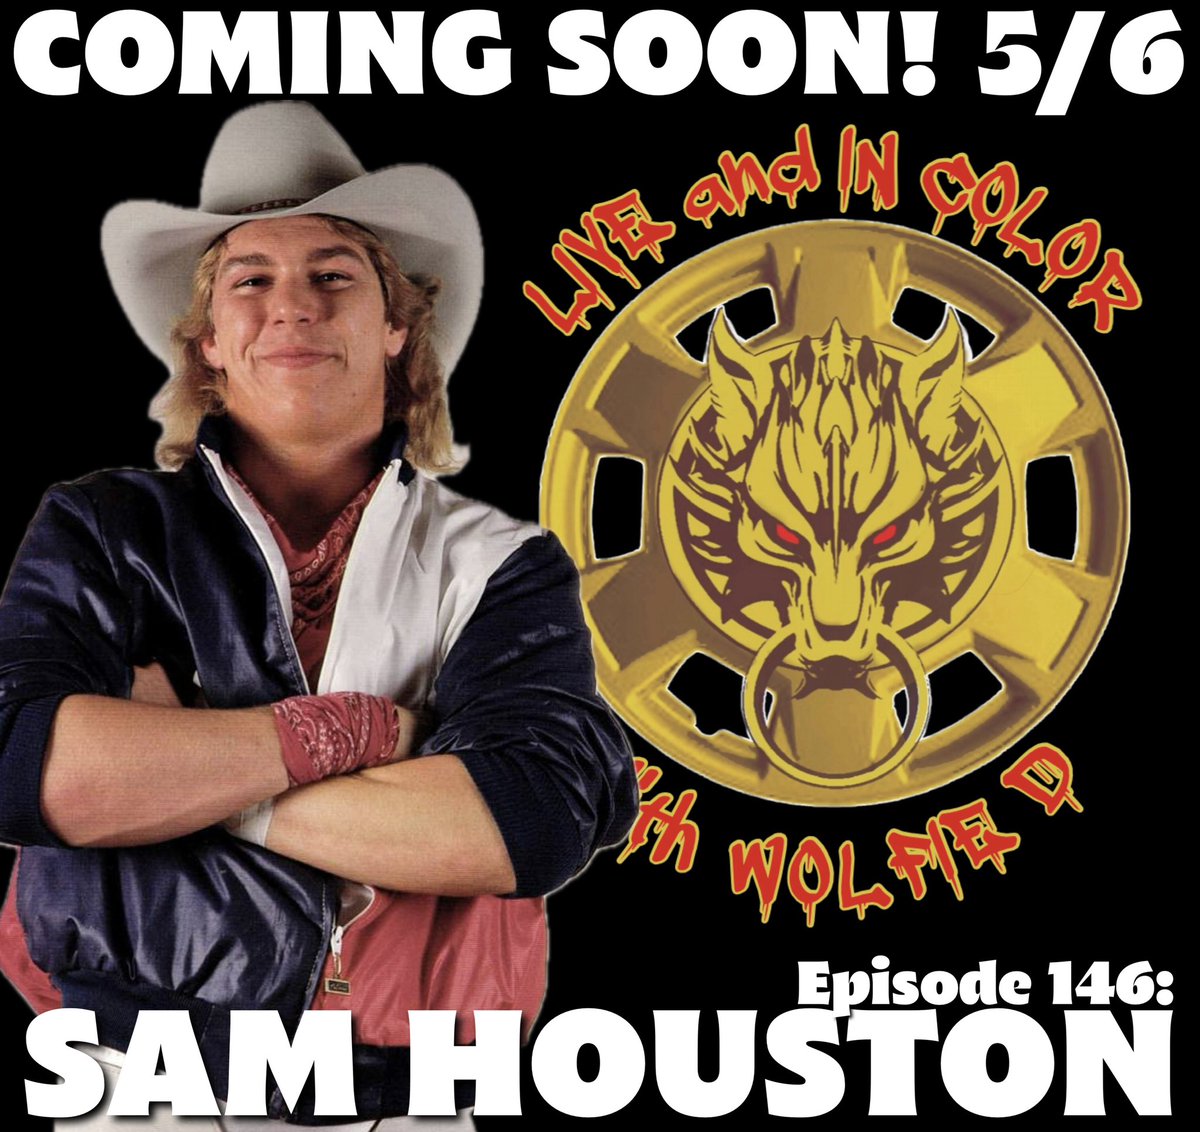 COMING SOON! Sam Houston is on the show! This one was a wild ride from the start, and to mention what we talked about would spoil the surprise! Let’s just say Sam has lived about 100 different lives! You don’t want to miss this one!